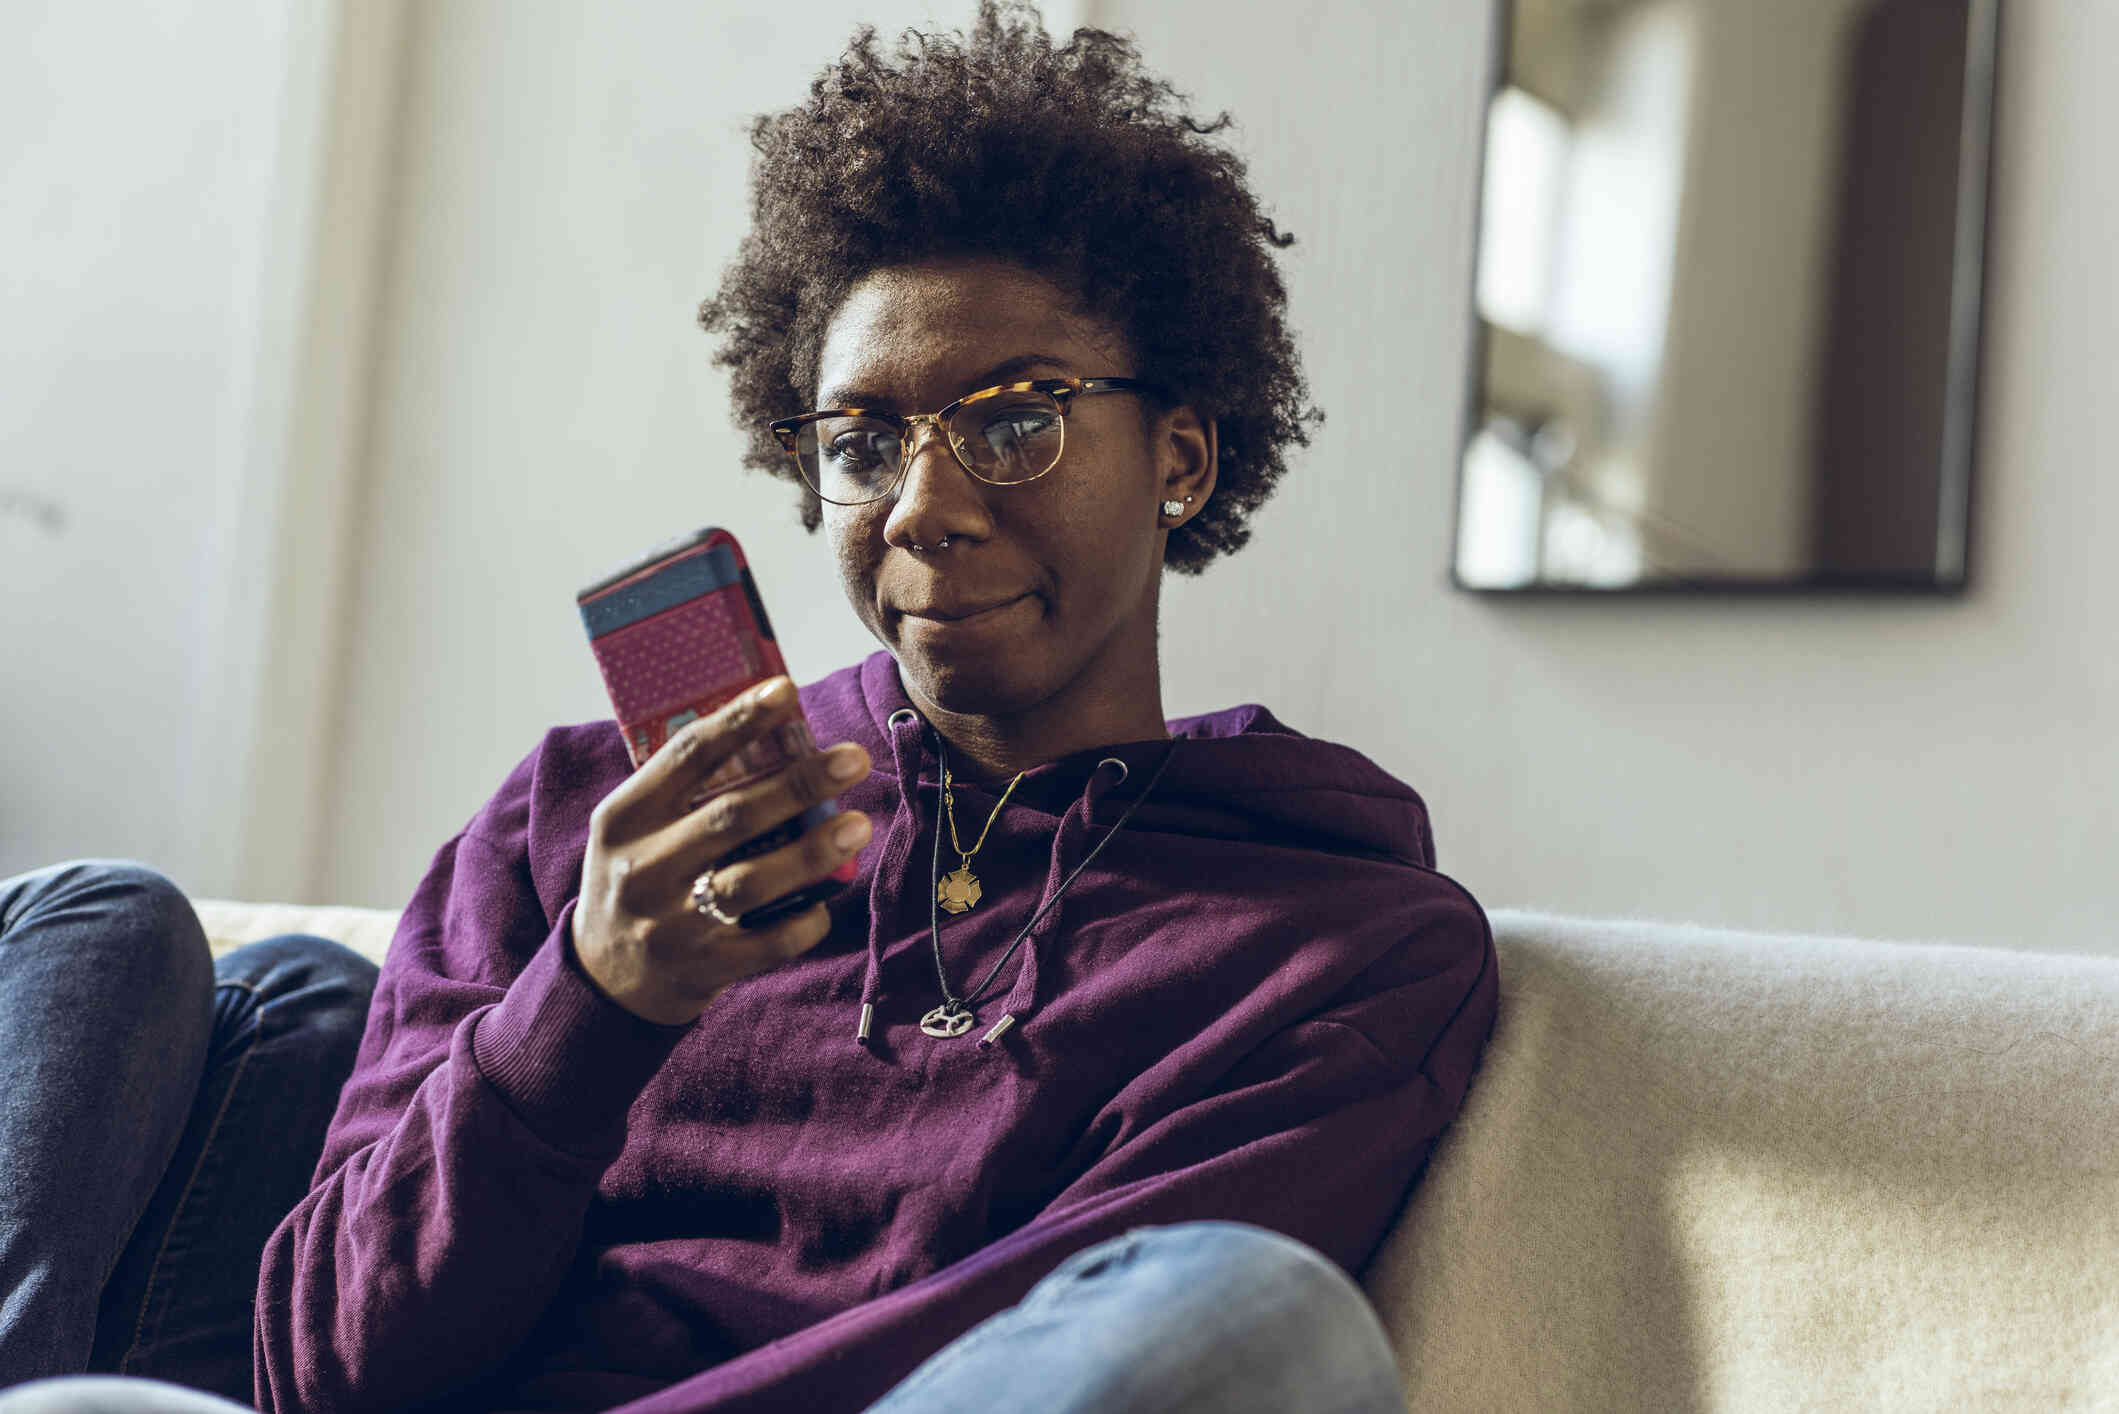 A woman in a purple sweater sits on the couch and looks at the cellphone in her hand with a serious expression.